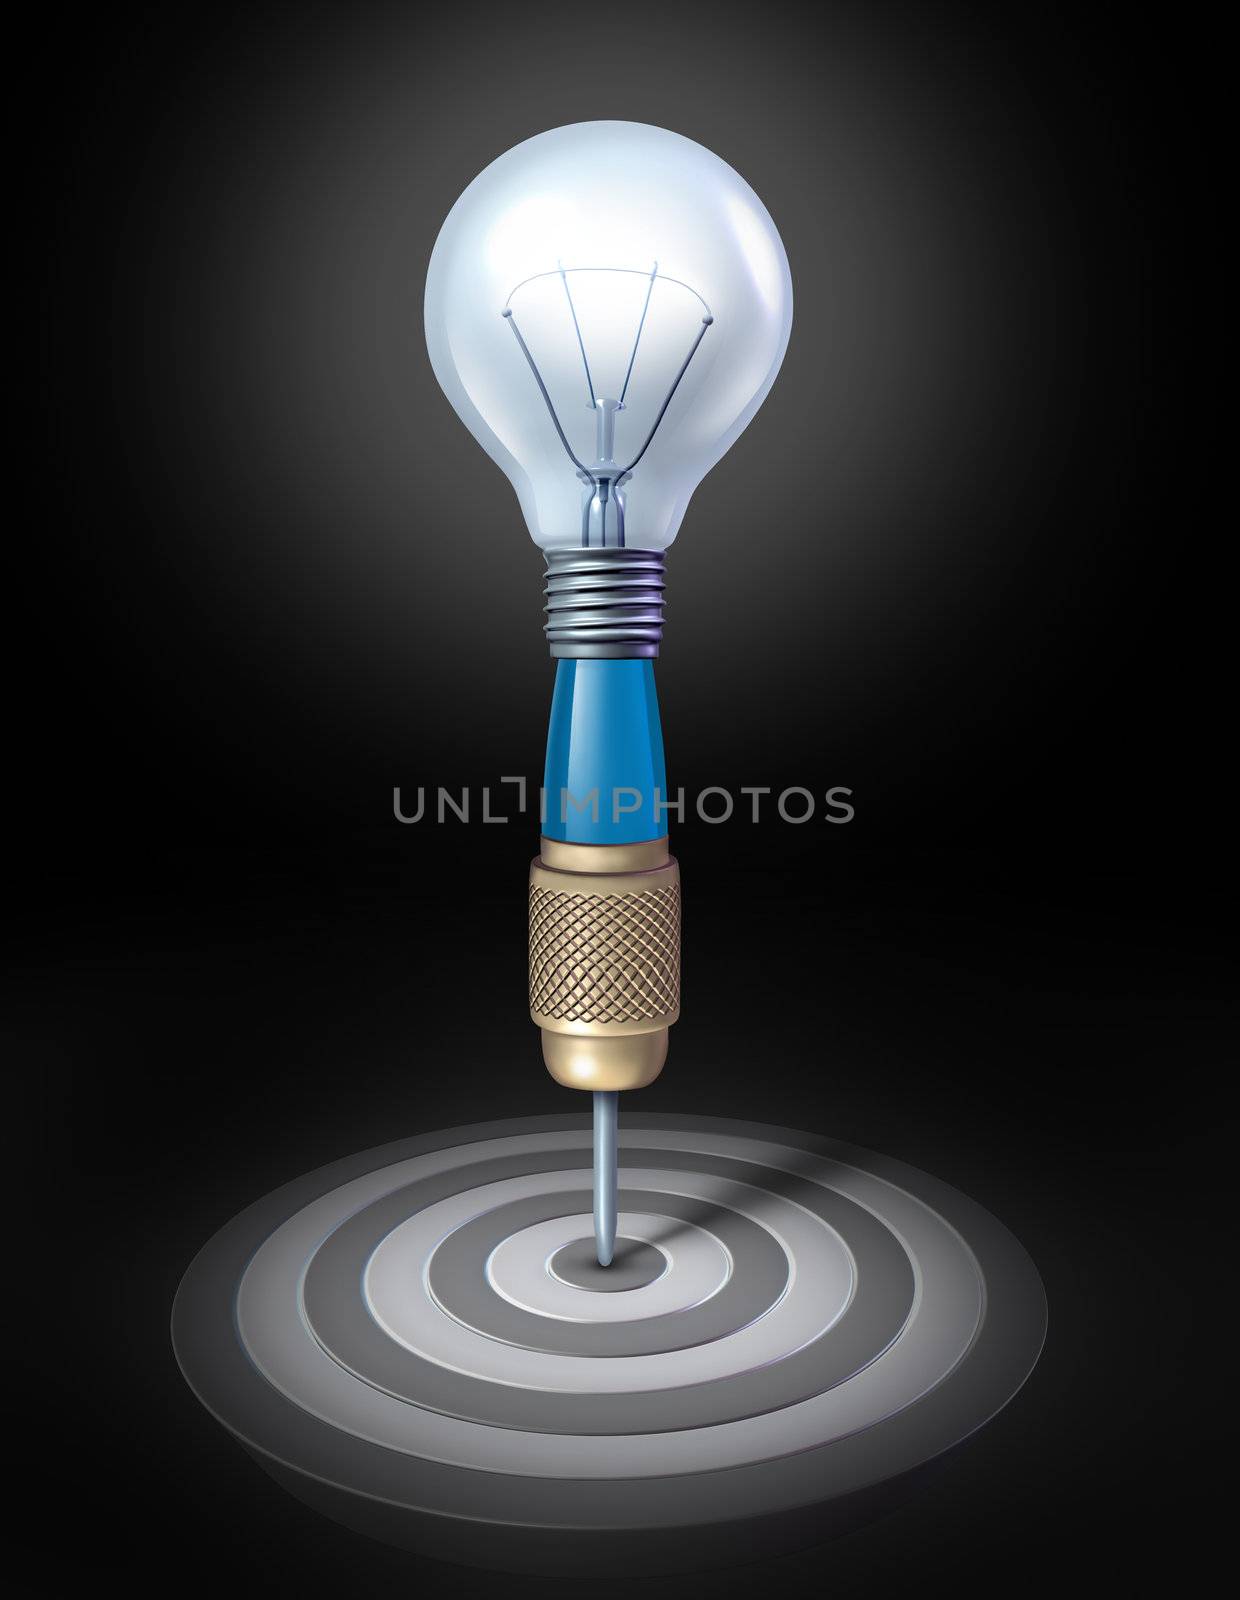 Target thinking and good ideas as a symbol for brilliant business intelligence with a dart shaped as a light bulb aimed on a perfect bulls eye with concentric circles on a black illuminated background.